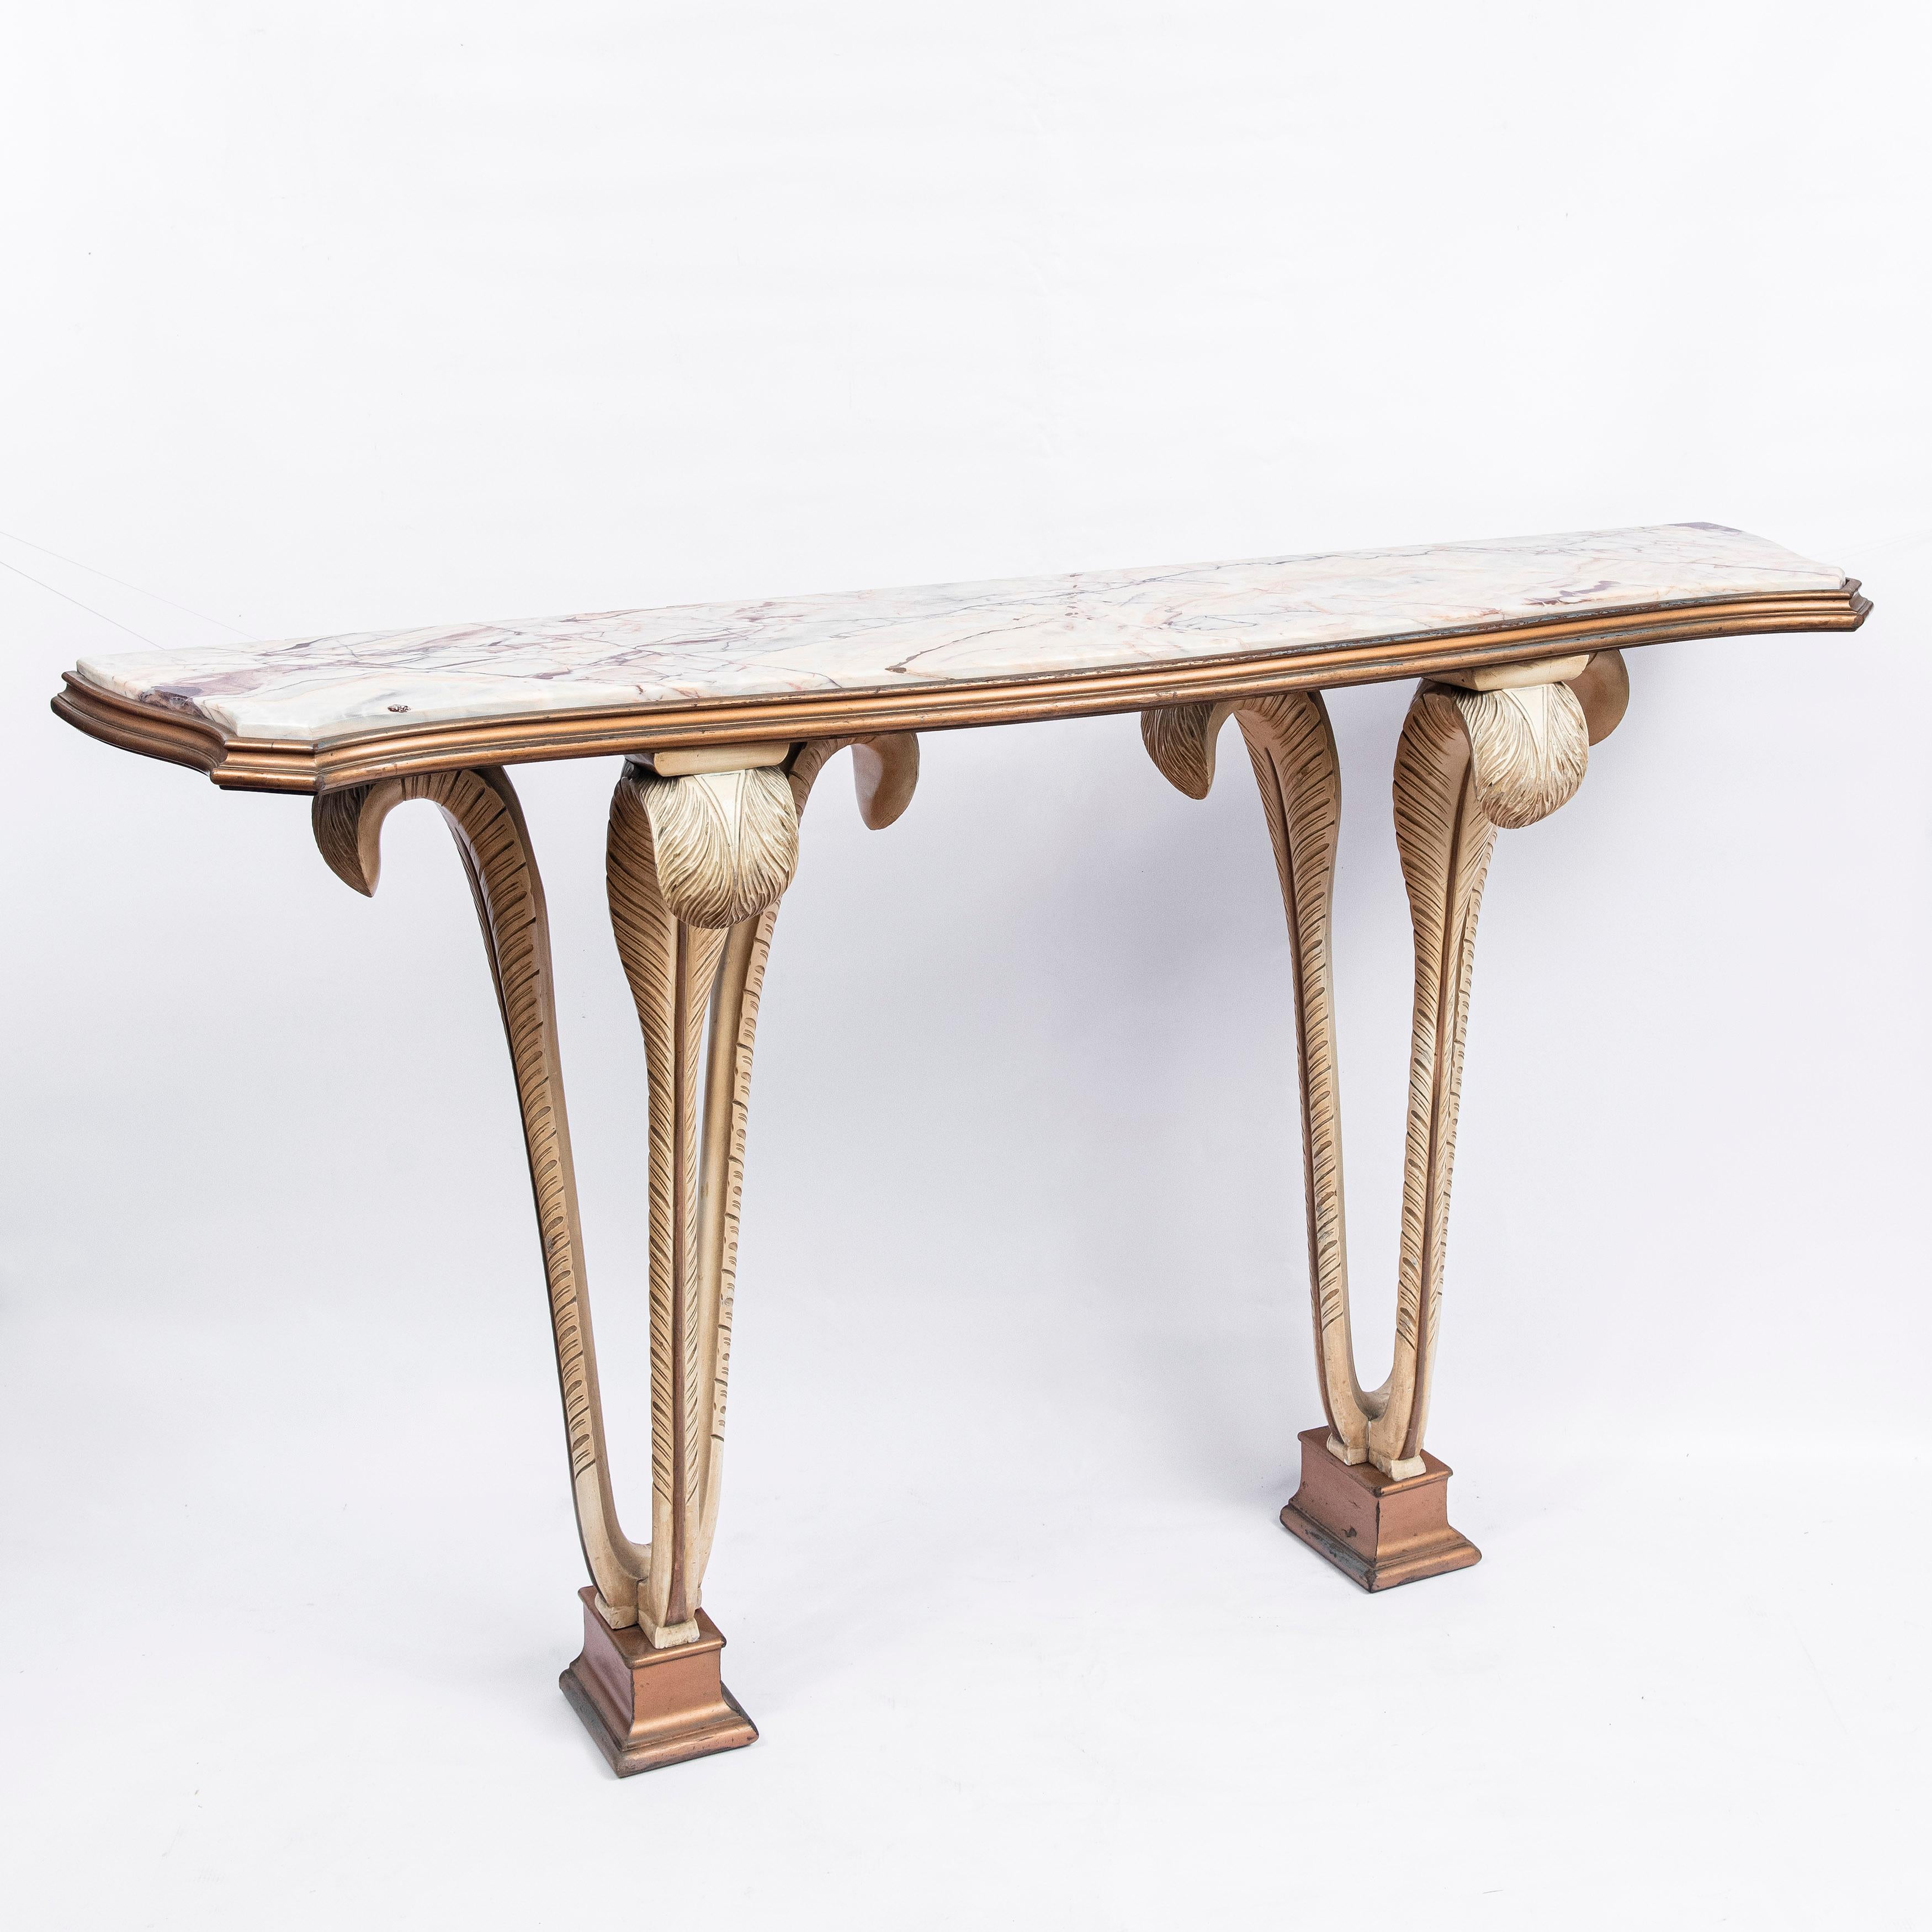 Patinated wood and marble console, France, circa 1950.
Attributed to Maison Jansen.